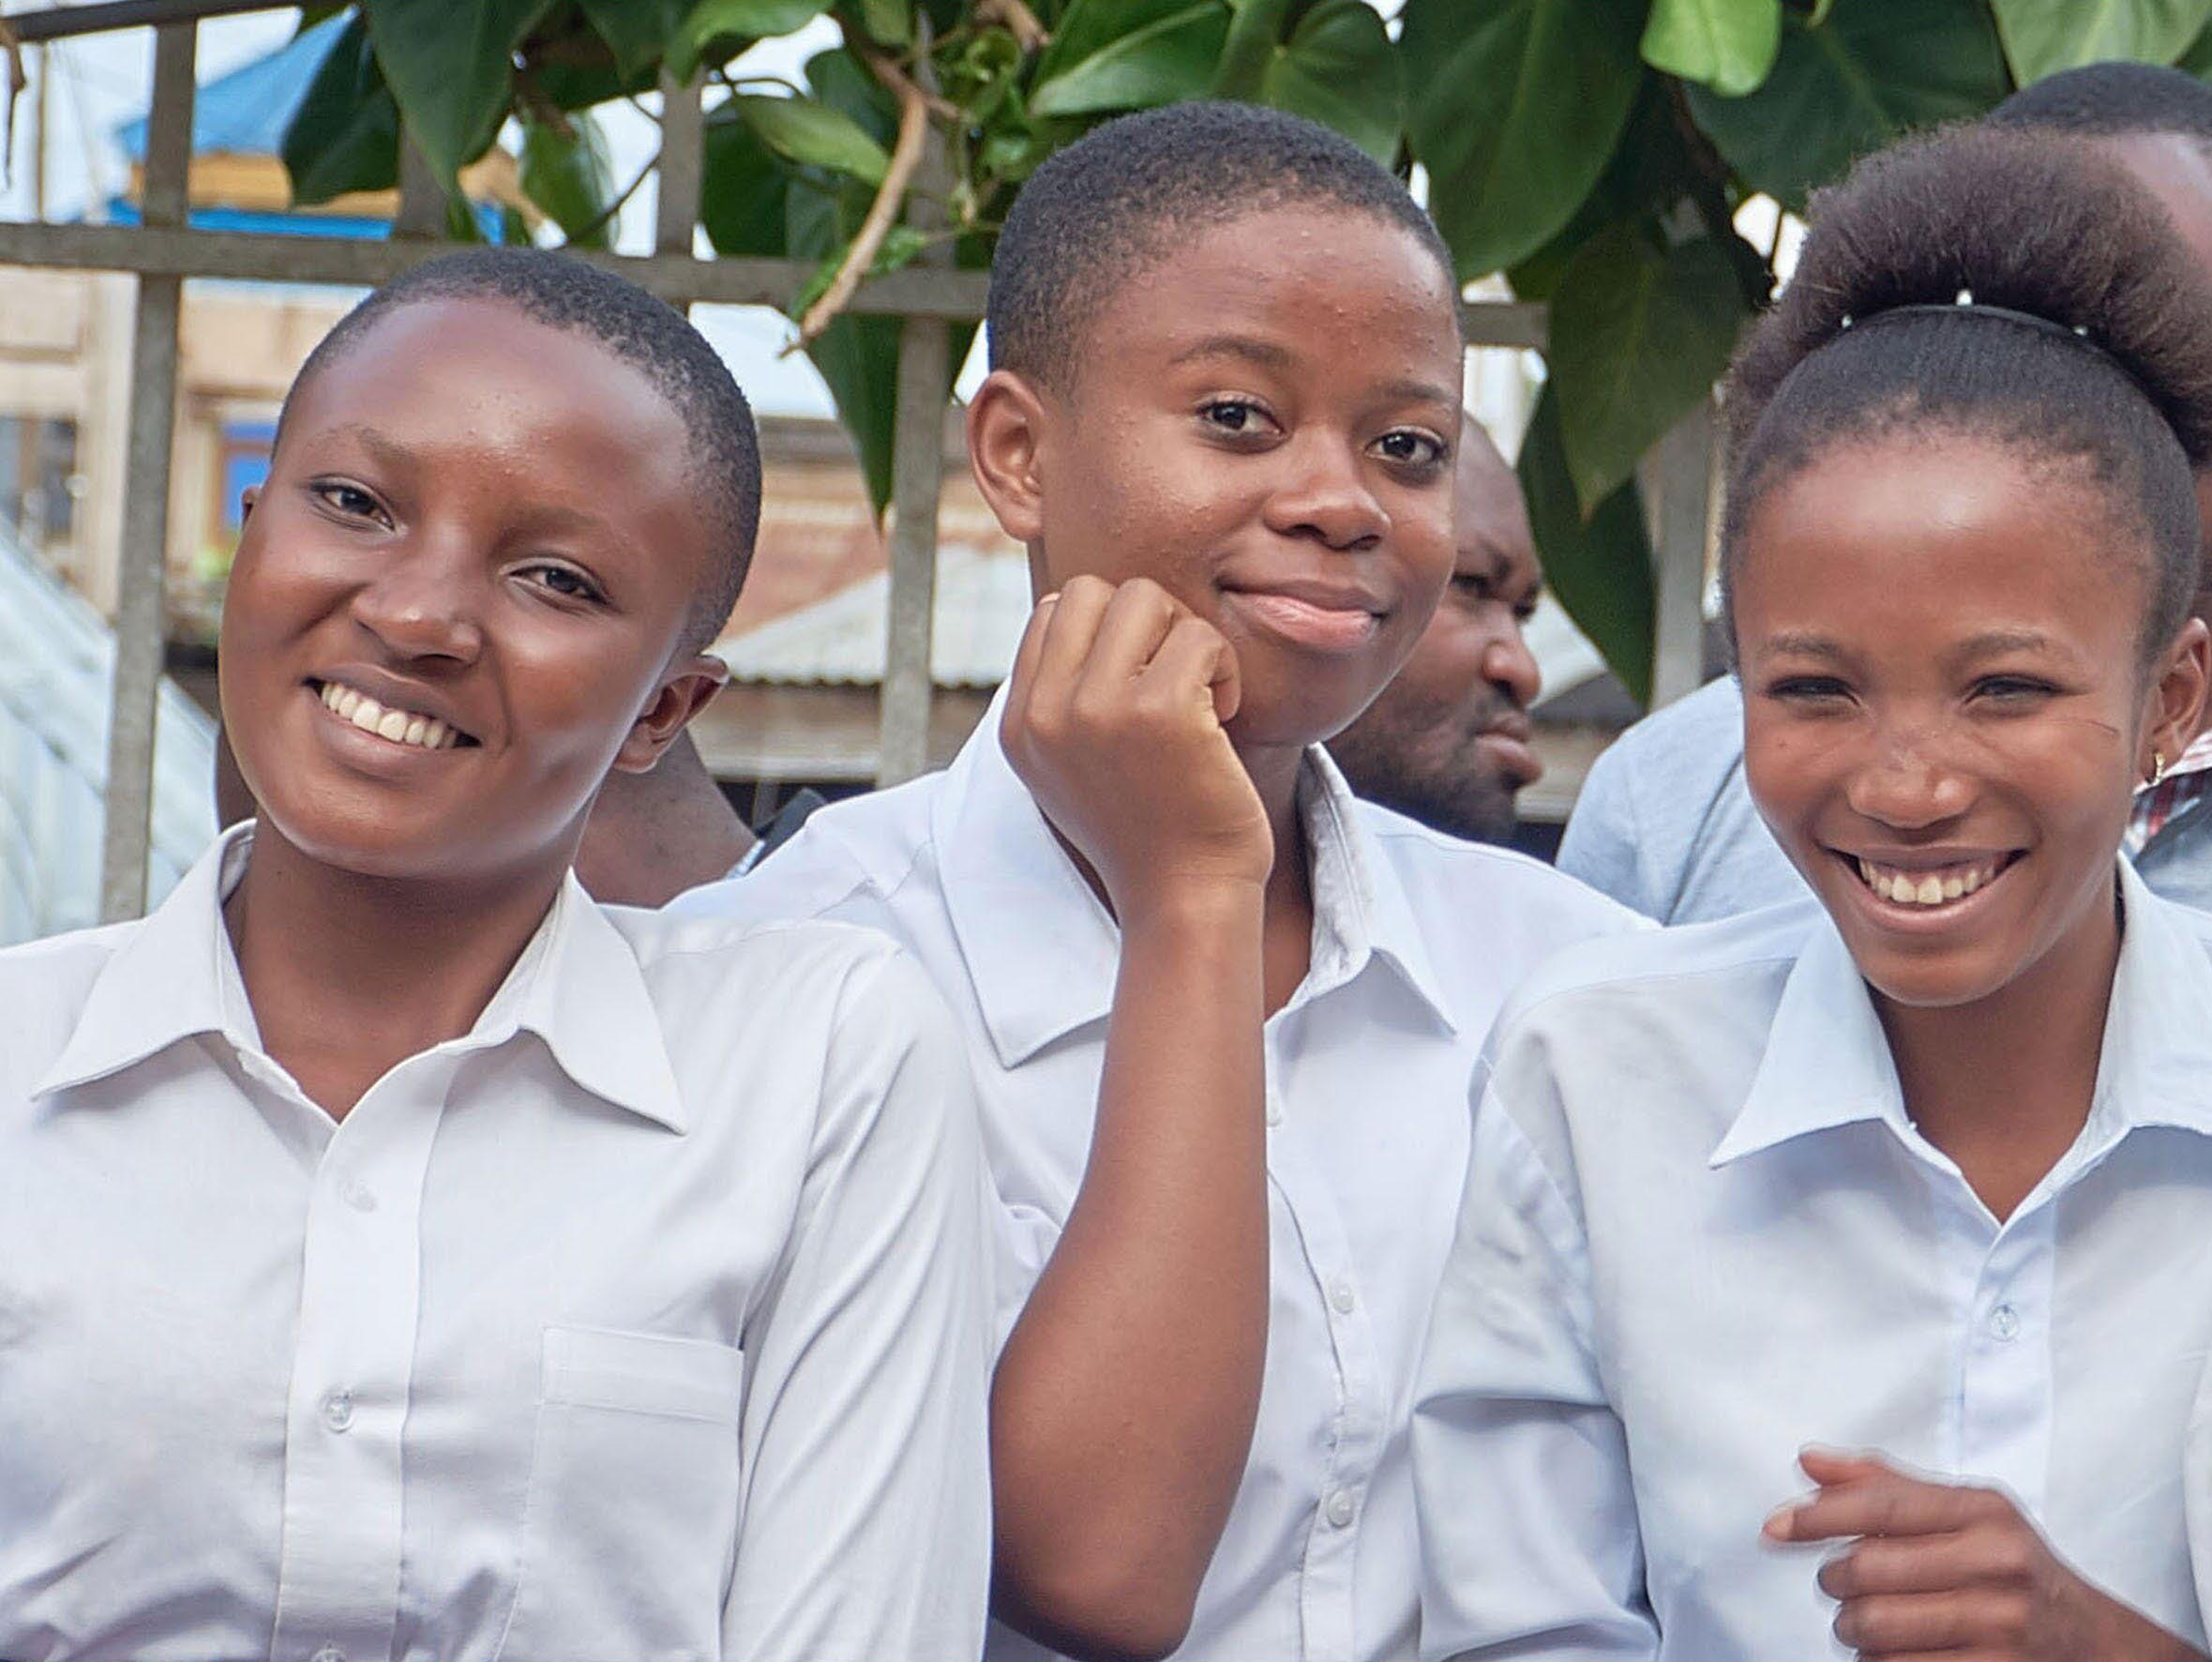 Three young black girls are wearing school uniforms and smiling at the camera